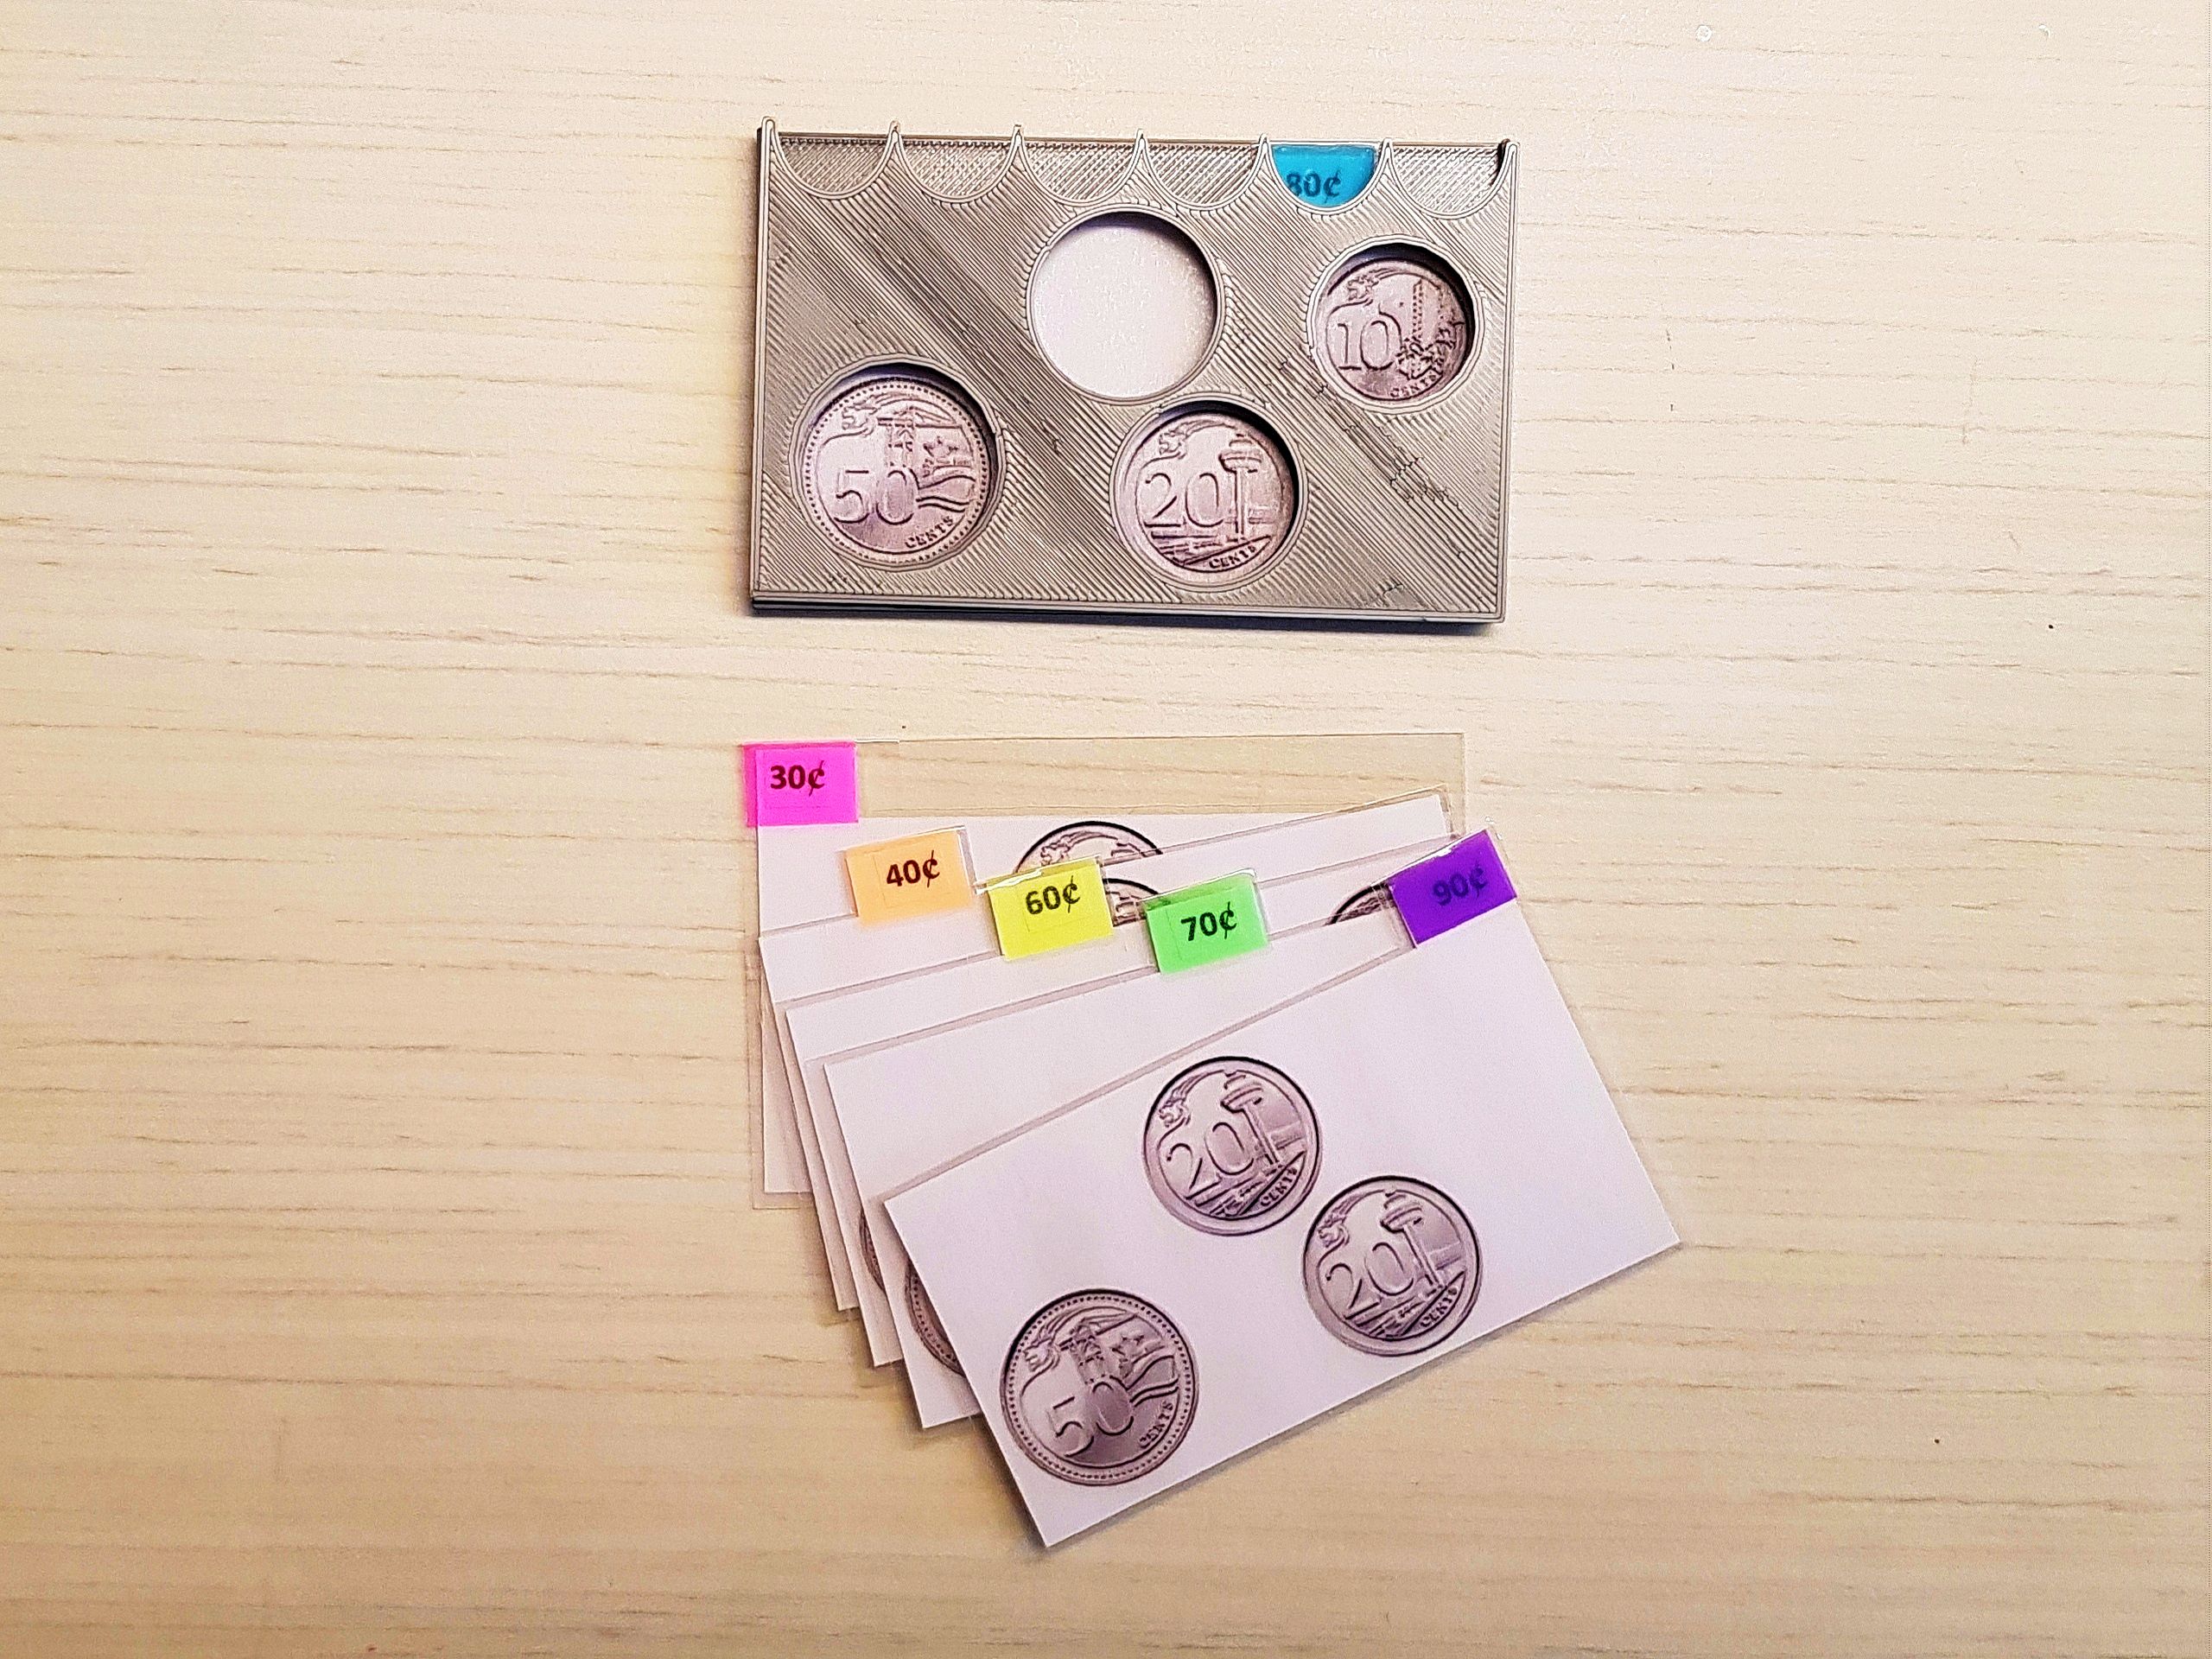 Version 2 of the 3D-printed coin card holder prototype with laminated cards of various combinations of printed images of 10, 20, and 50 cents.